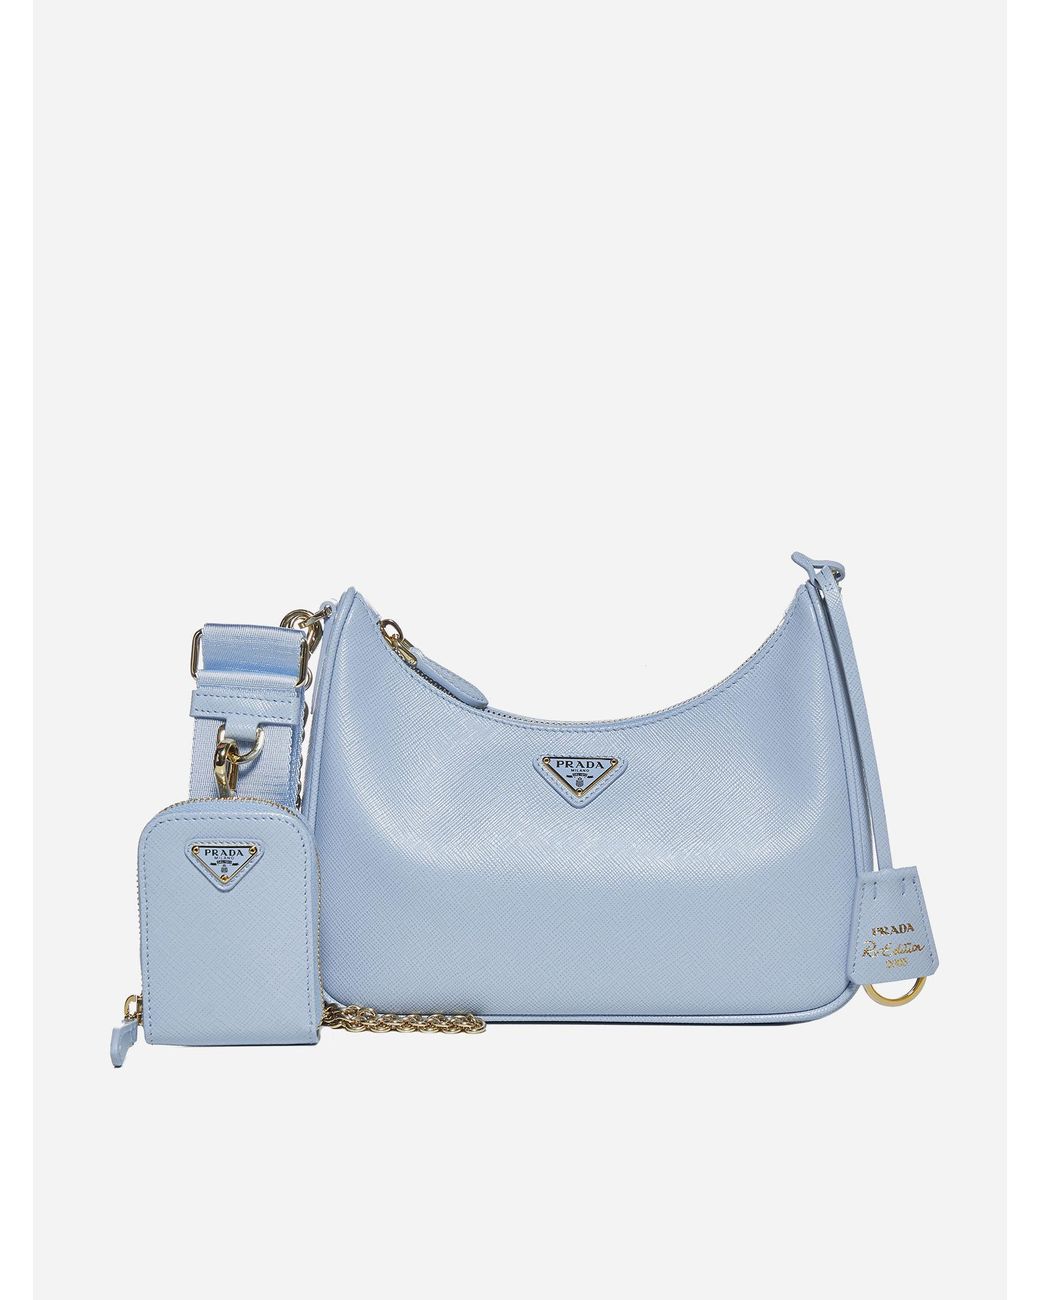 Prada Re-edition 2005 Saffiano Leather Bag in Blue | Lyst UK